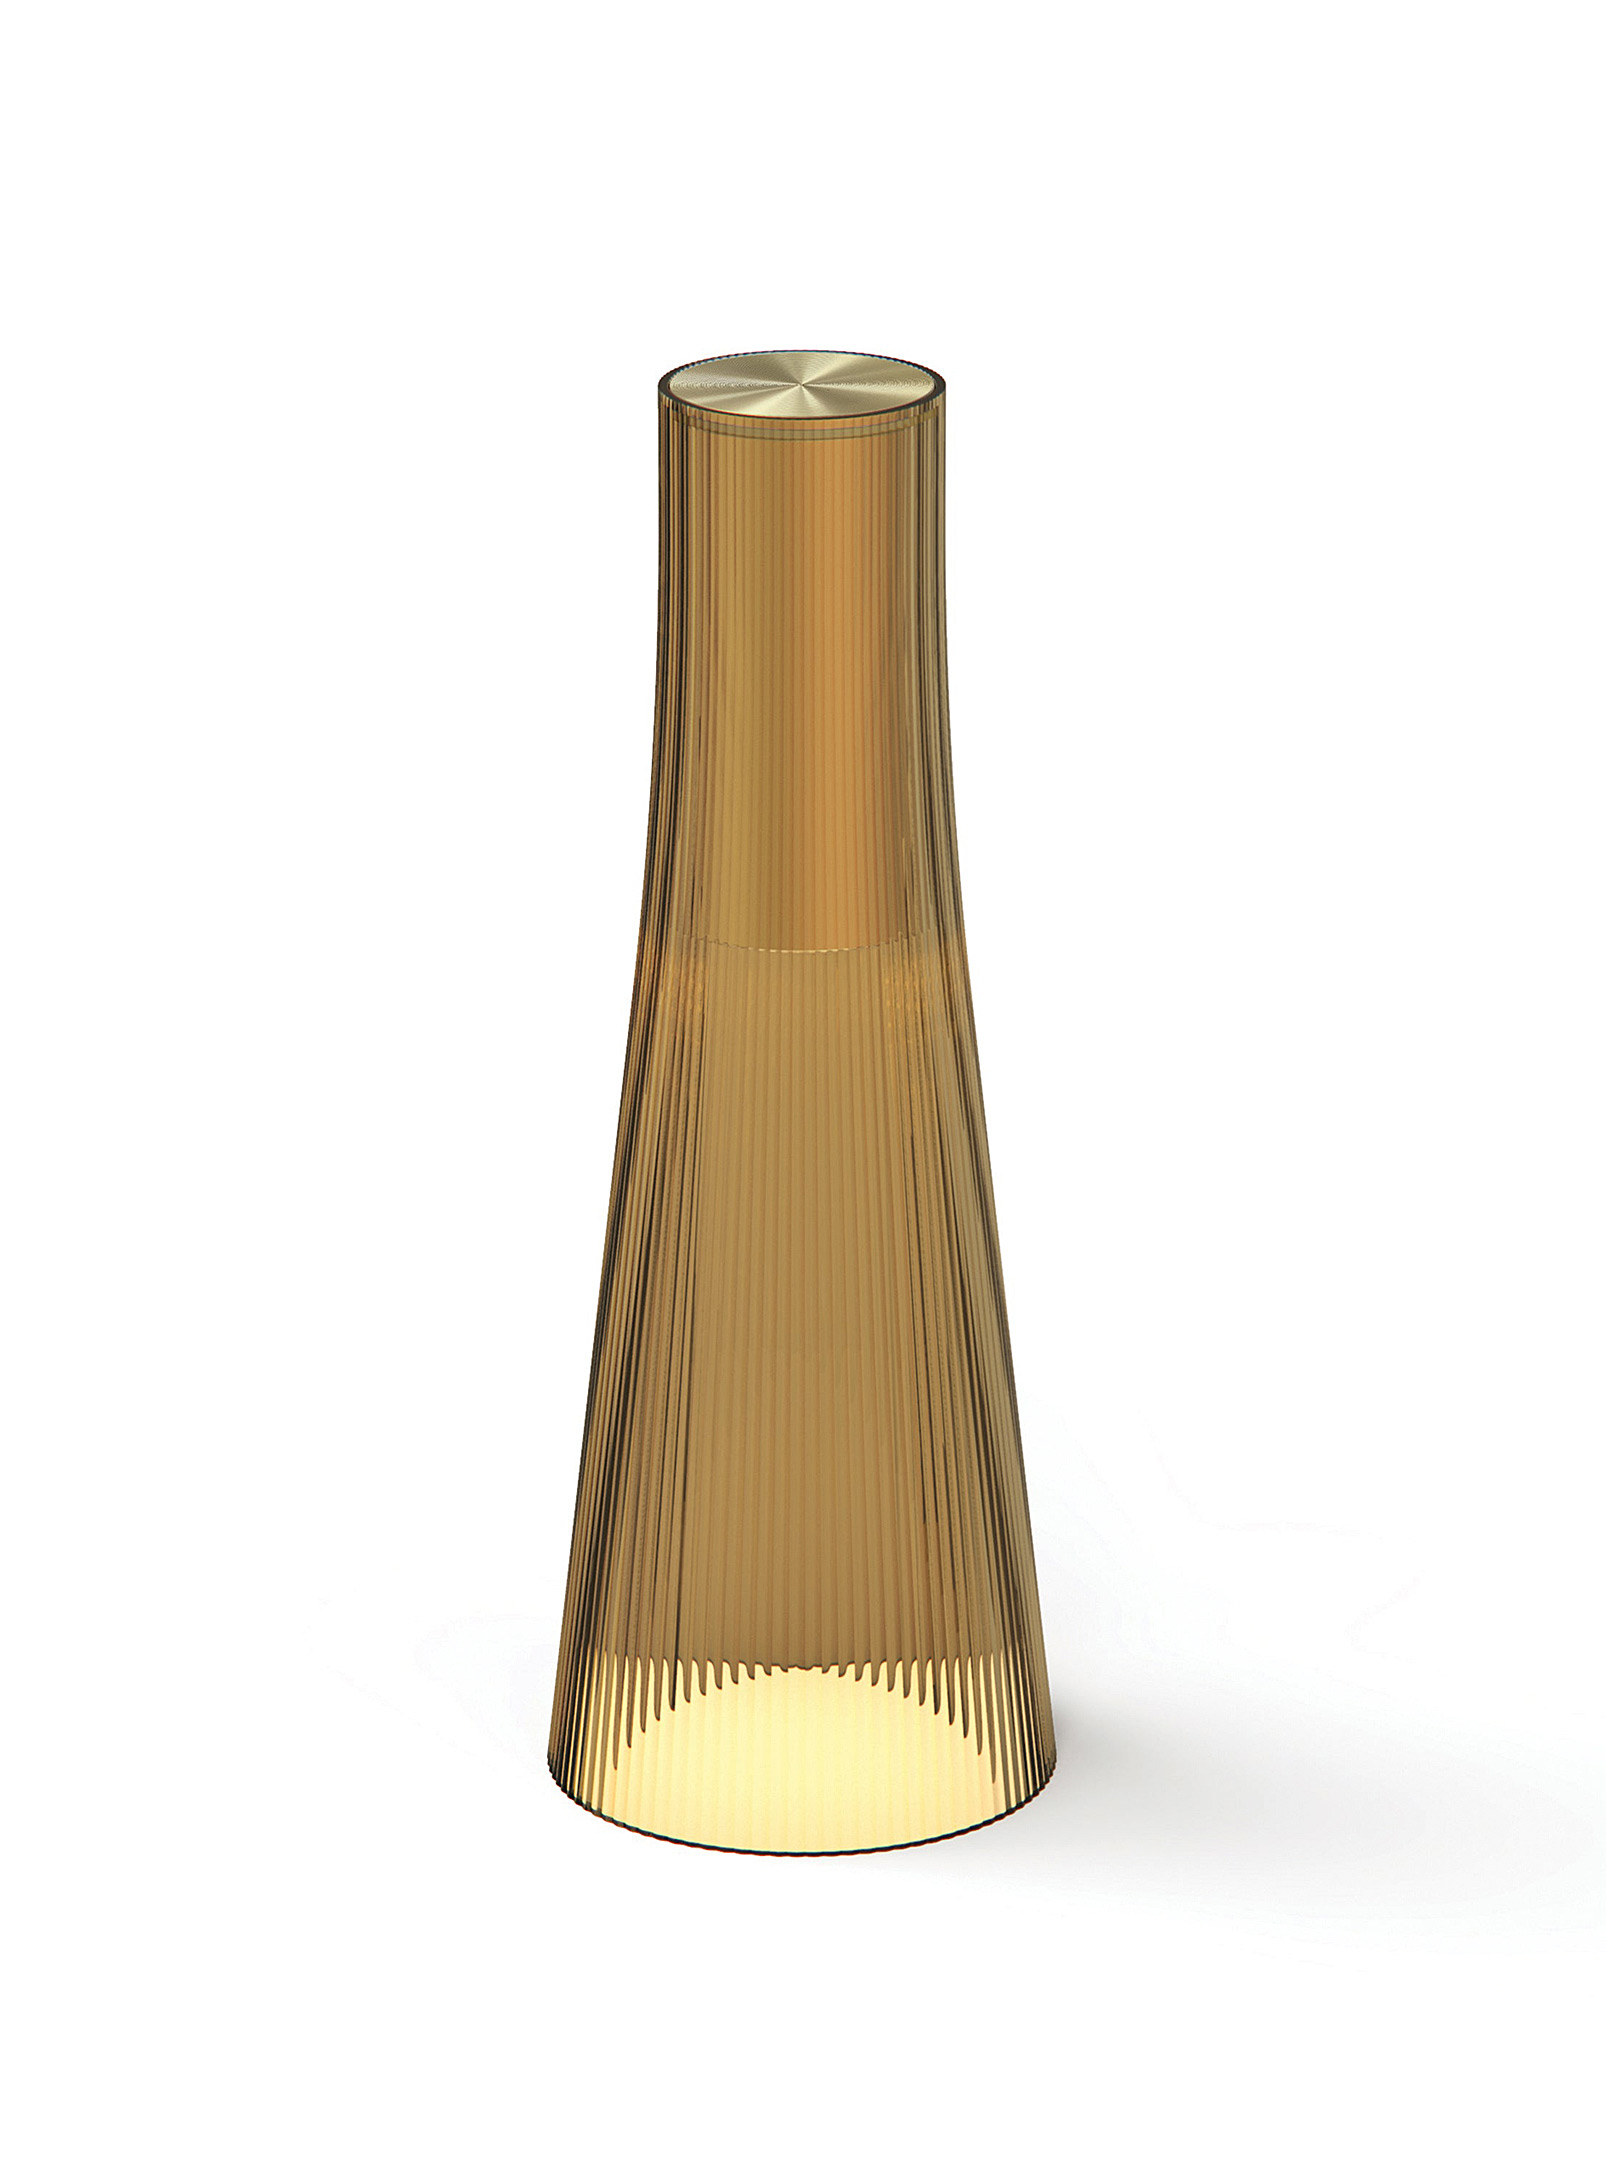 Pablo Designs Candél Portable Conical Lamp In Assorted